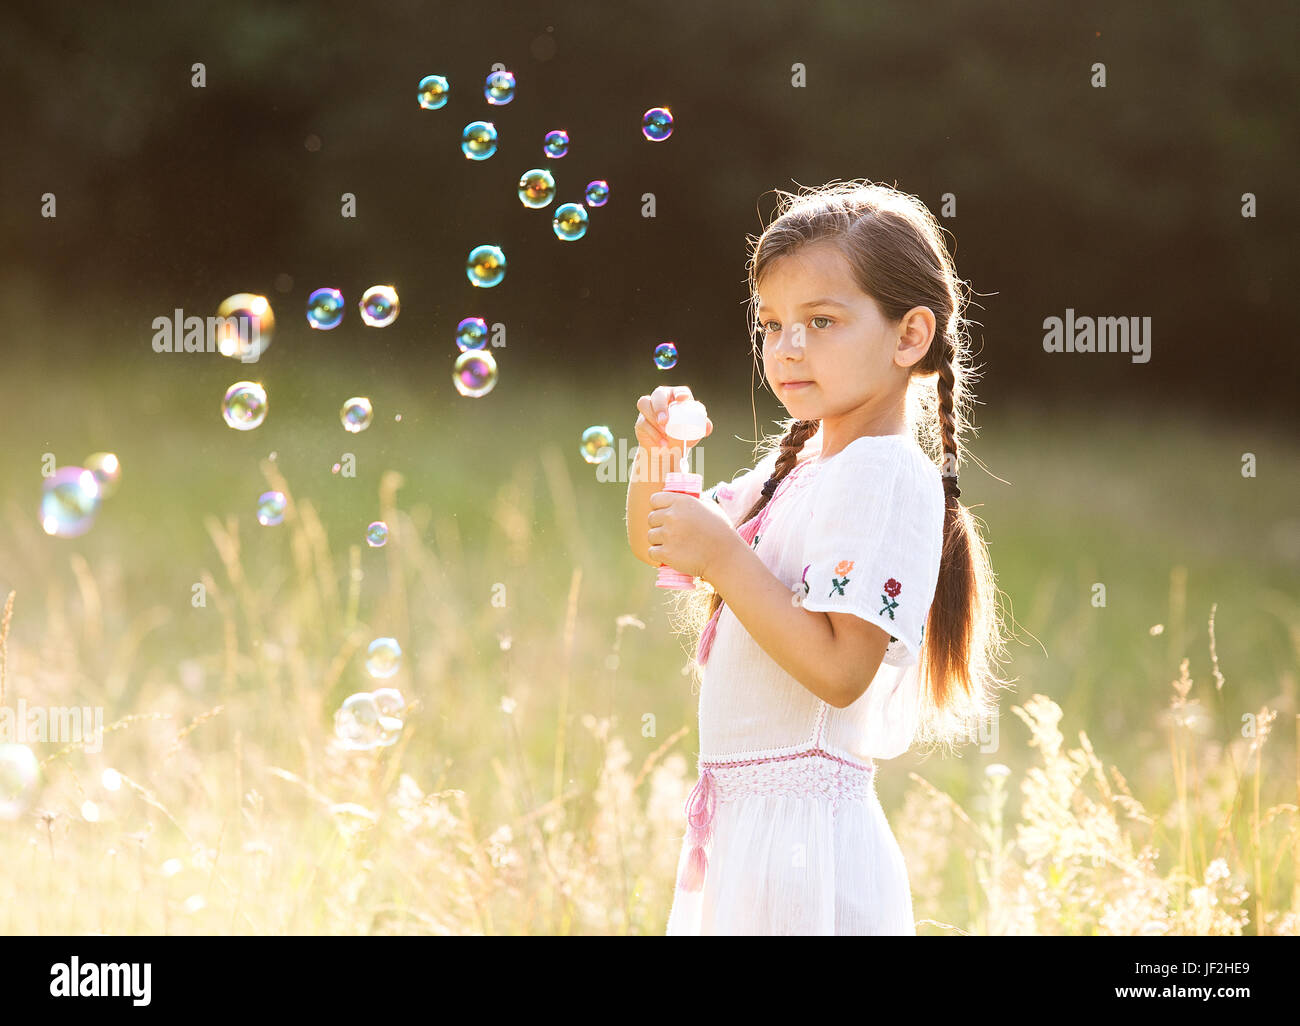 little happy girl with tight braids wearing traditional romanian blouse running outside Stock Photo